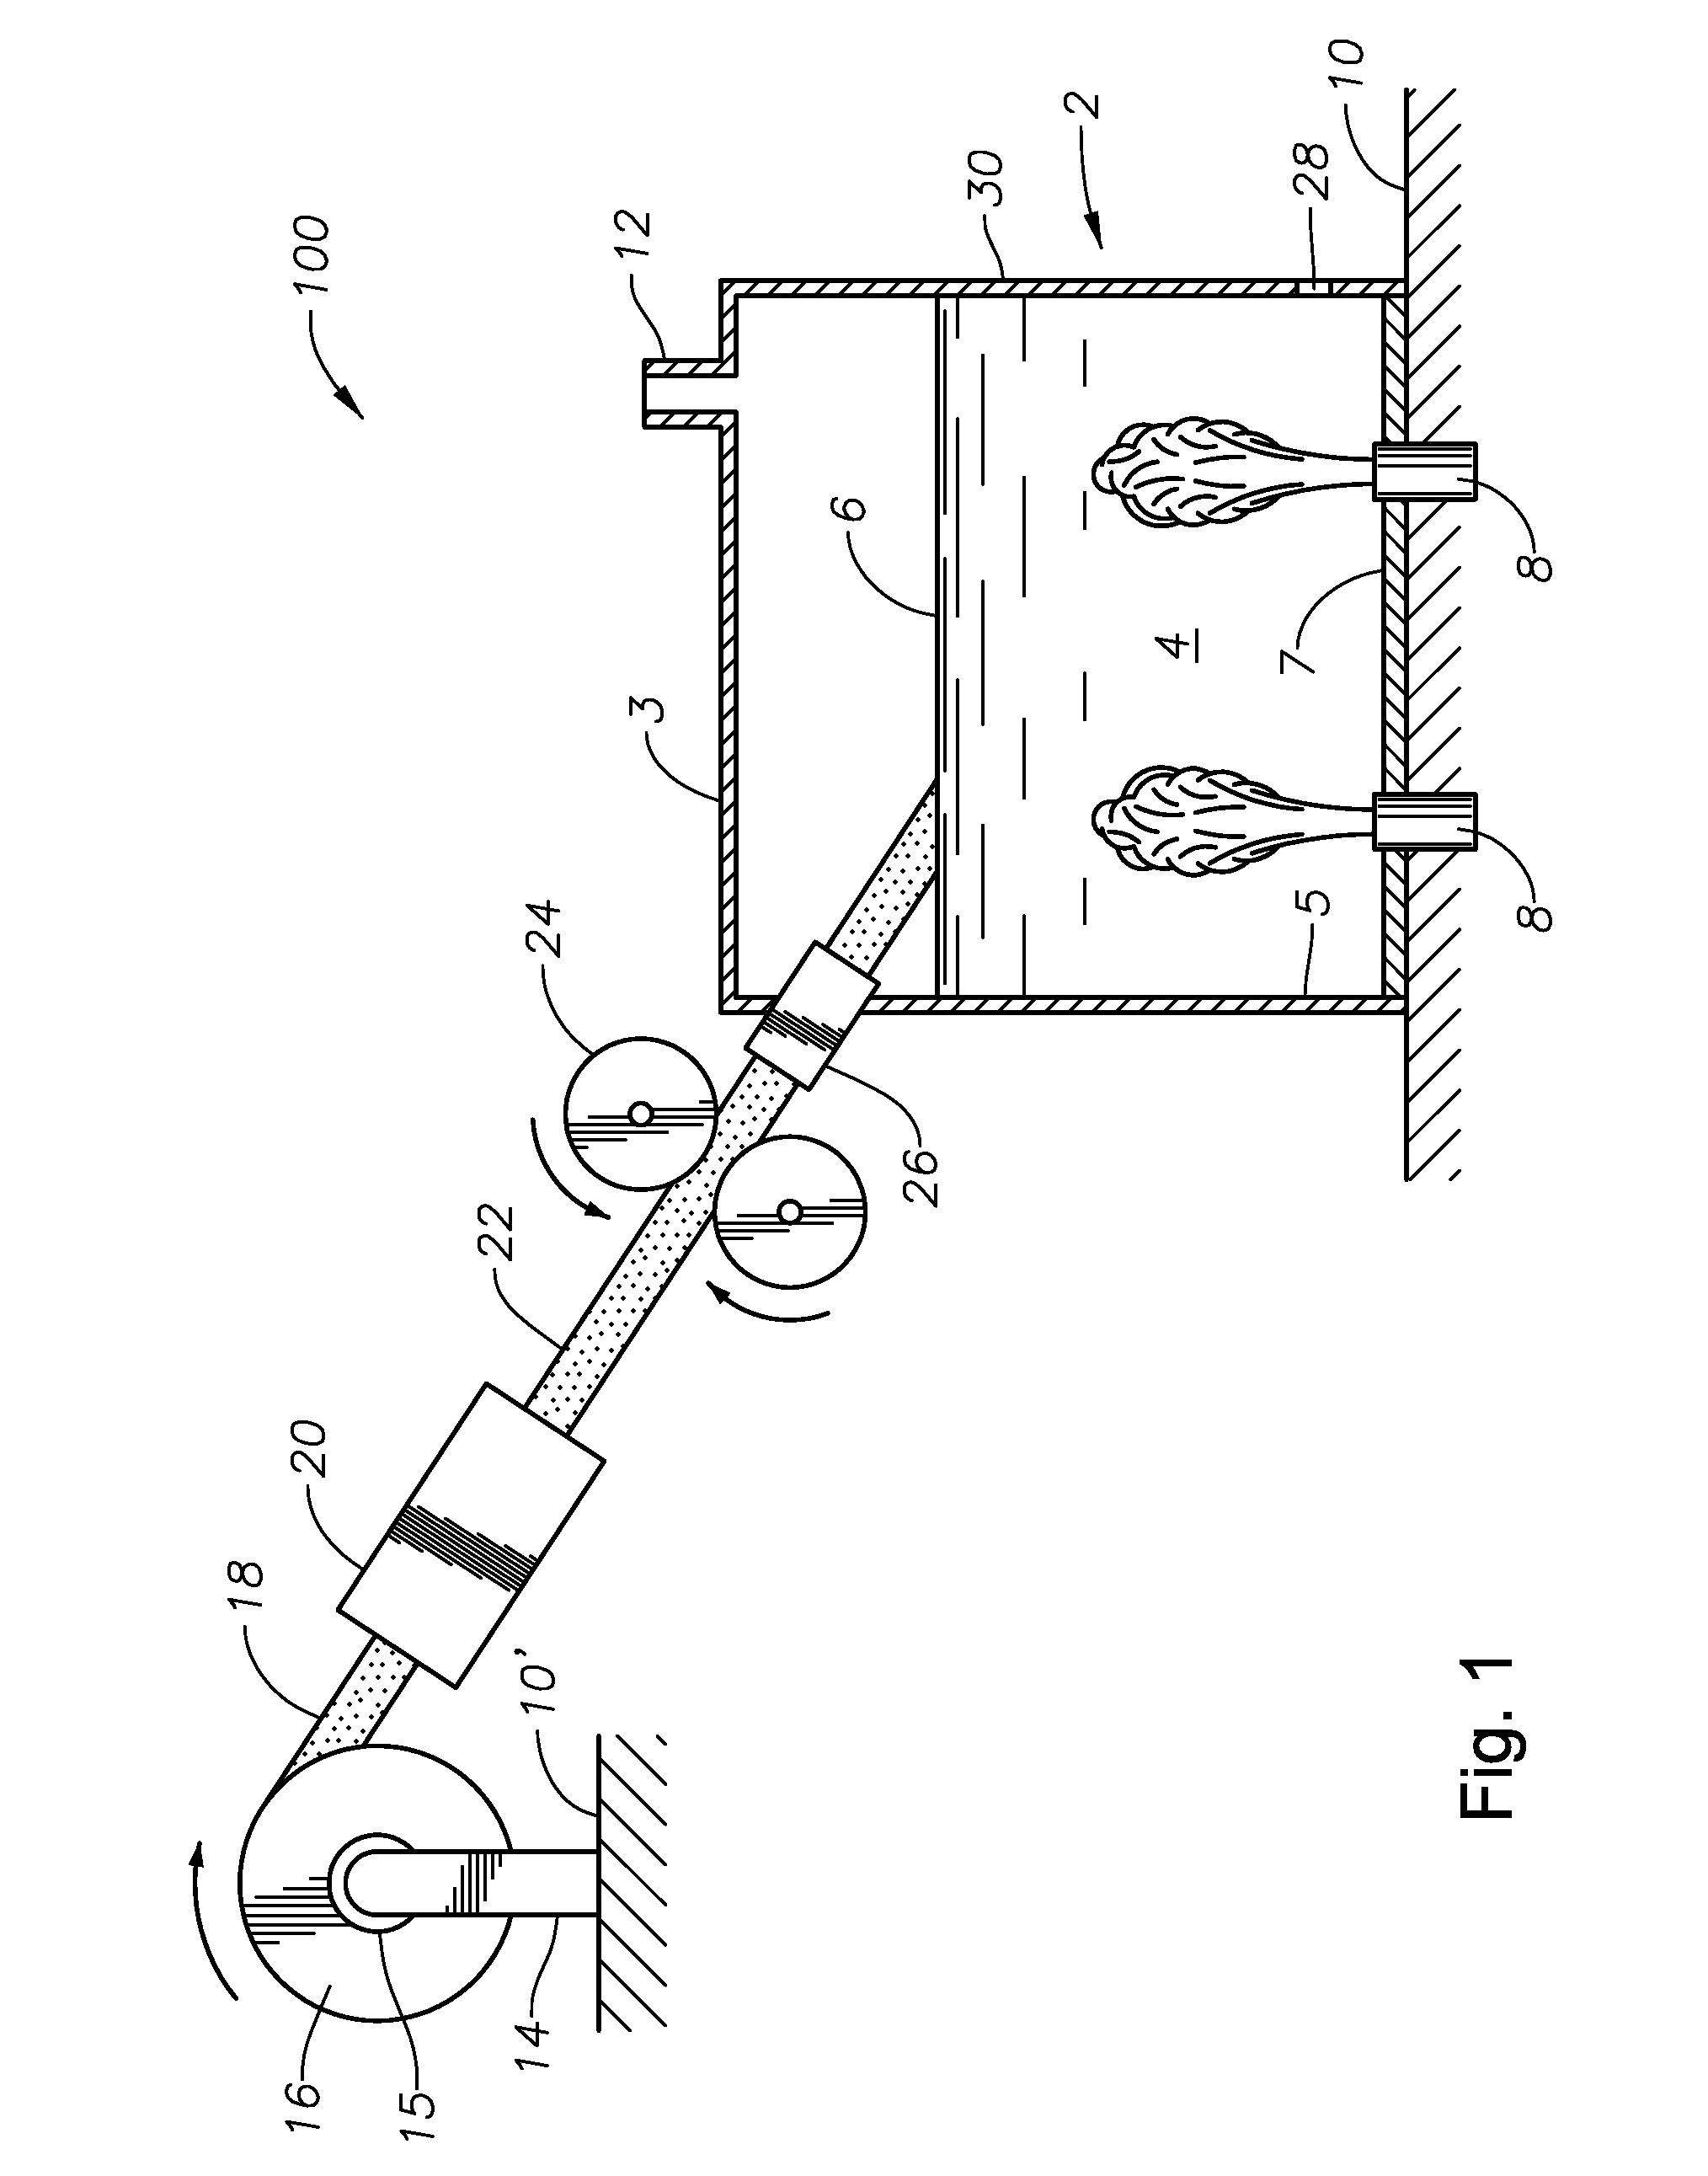 Methods and apparatus for recycling glass products using submerged combustion